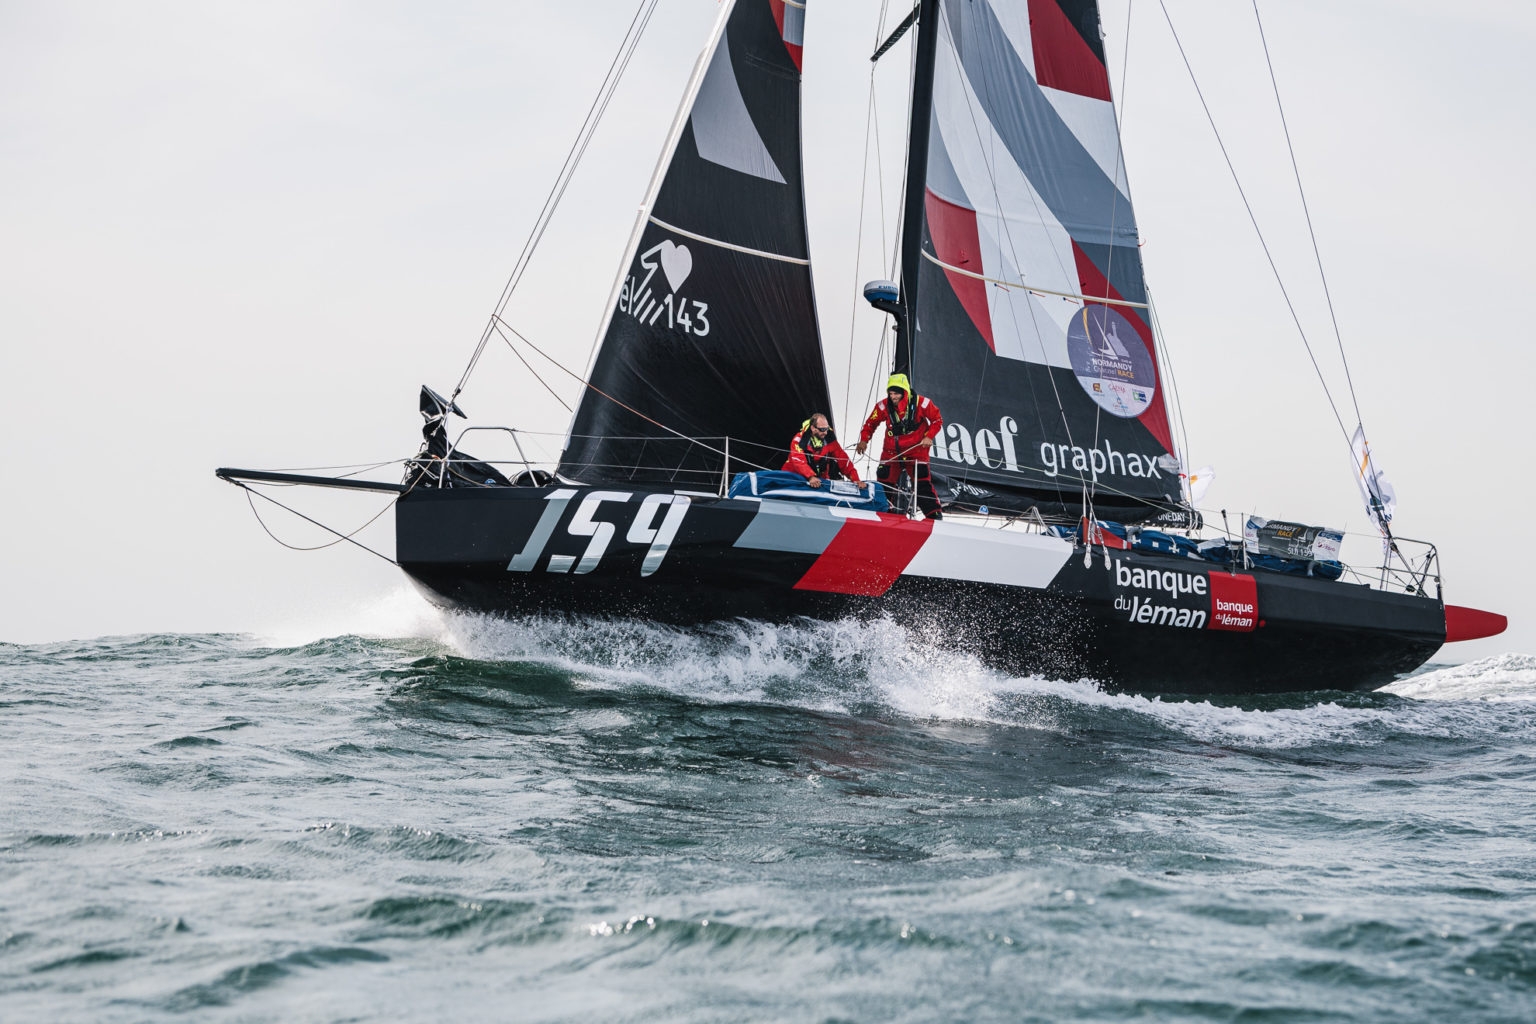  Class 40  Normandy Channel Race  Caen FRA  Victory for Simon Koster/Valentin Gautier SUI !